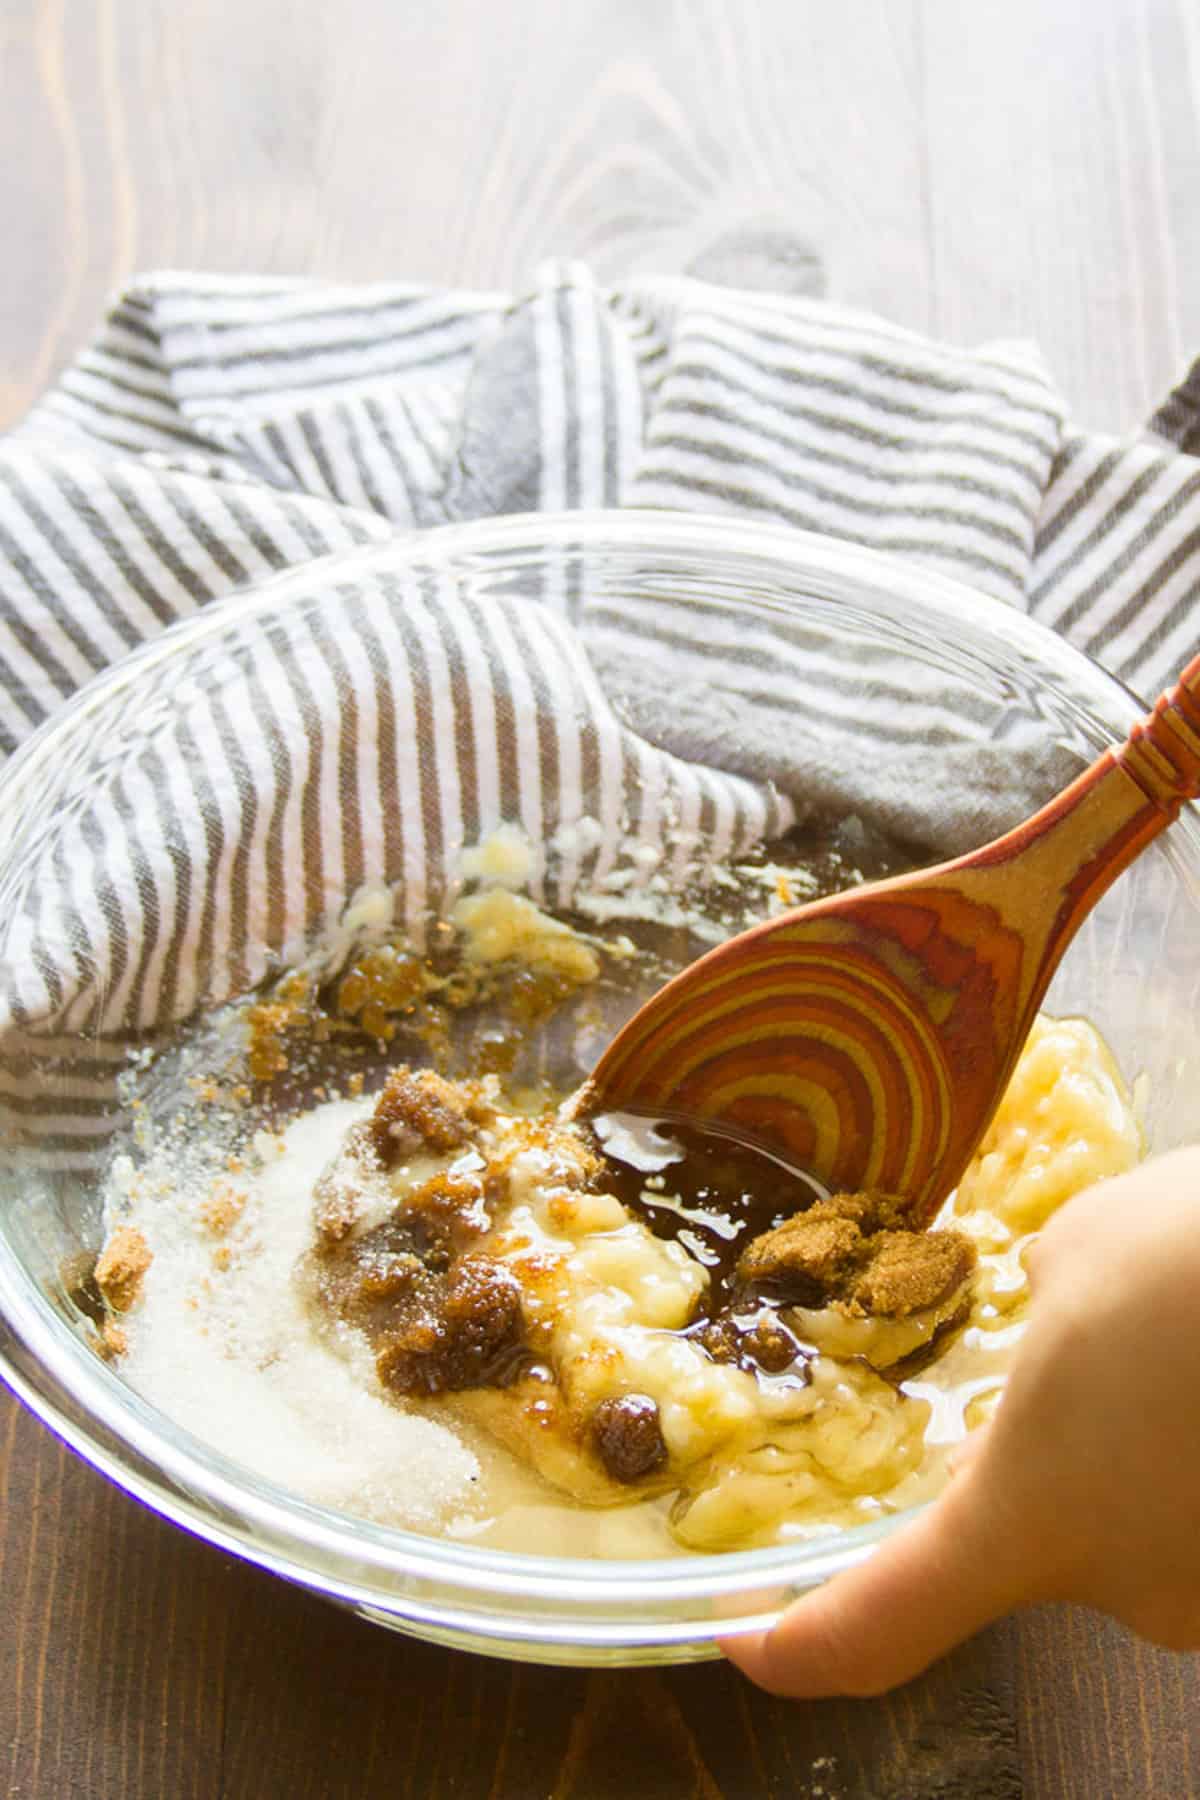 Spoon stirring wet banana bread ingredients together in a bowl.